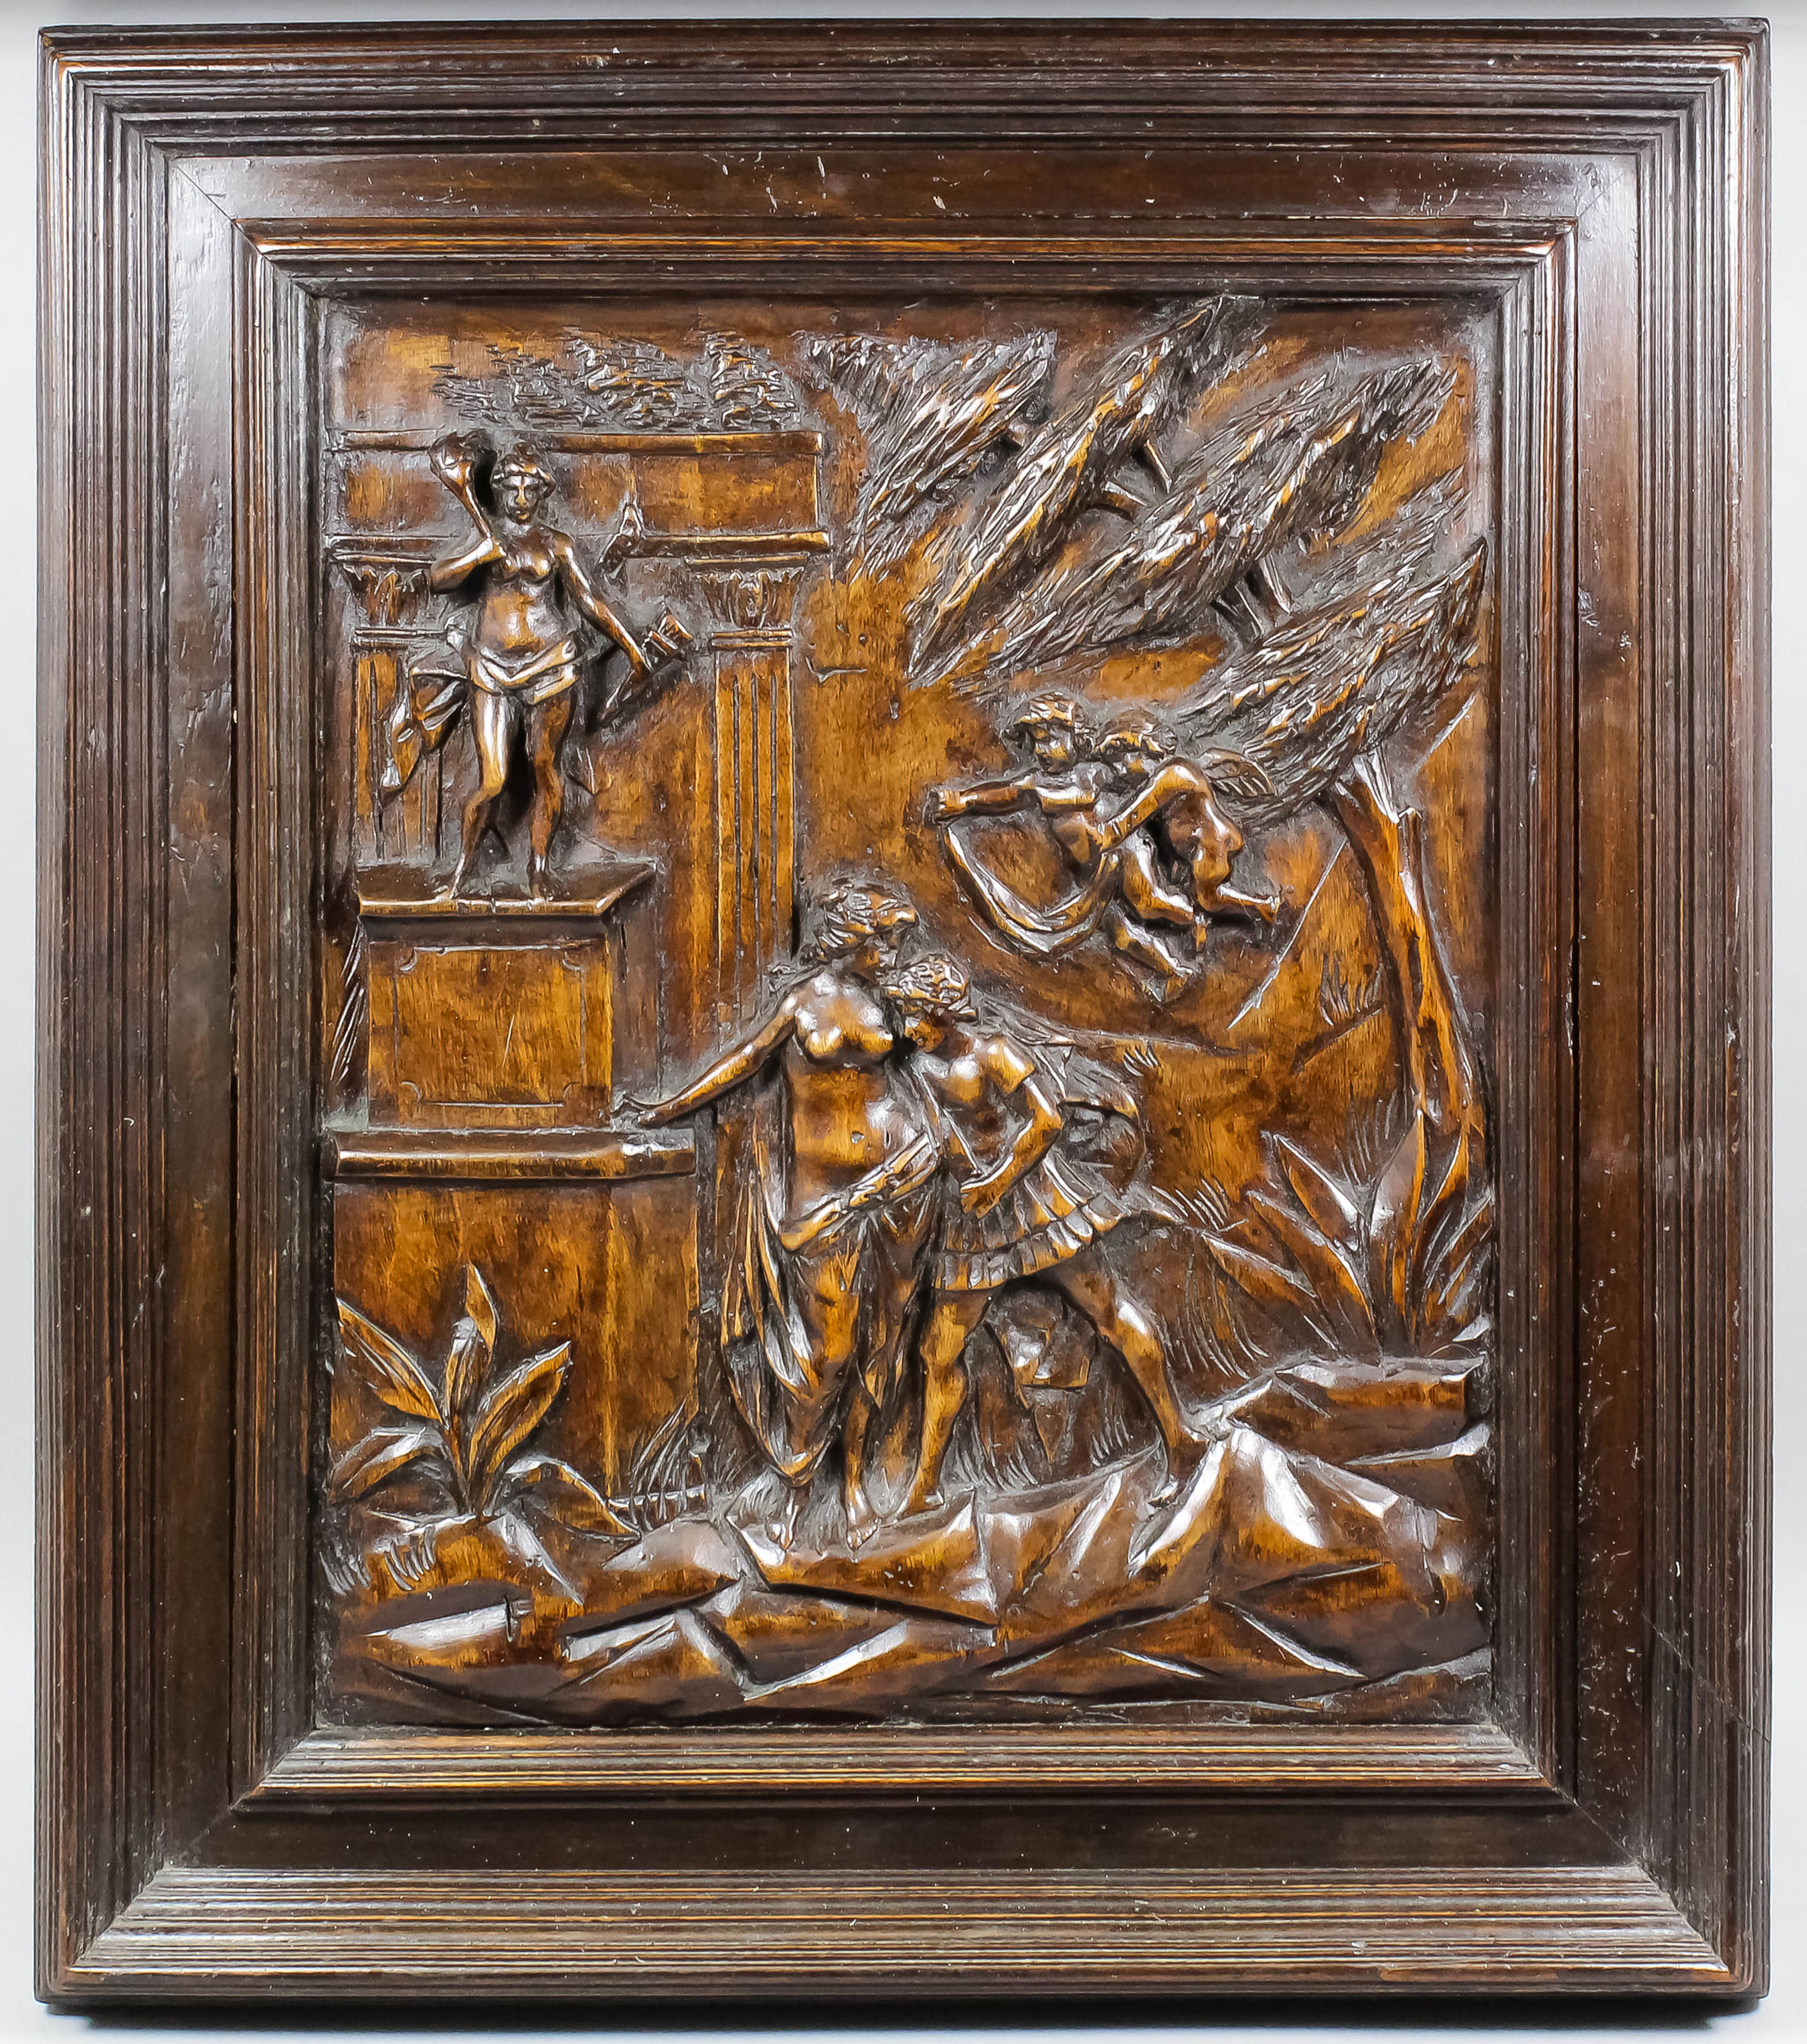 A 16th Century carved walnut panel with a classical scene of male and female figures beside a statue